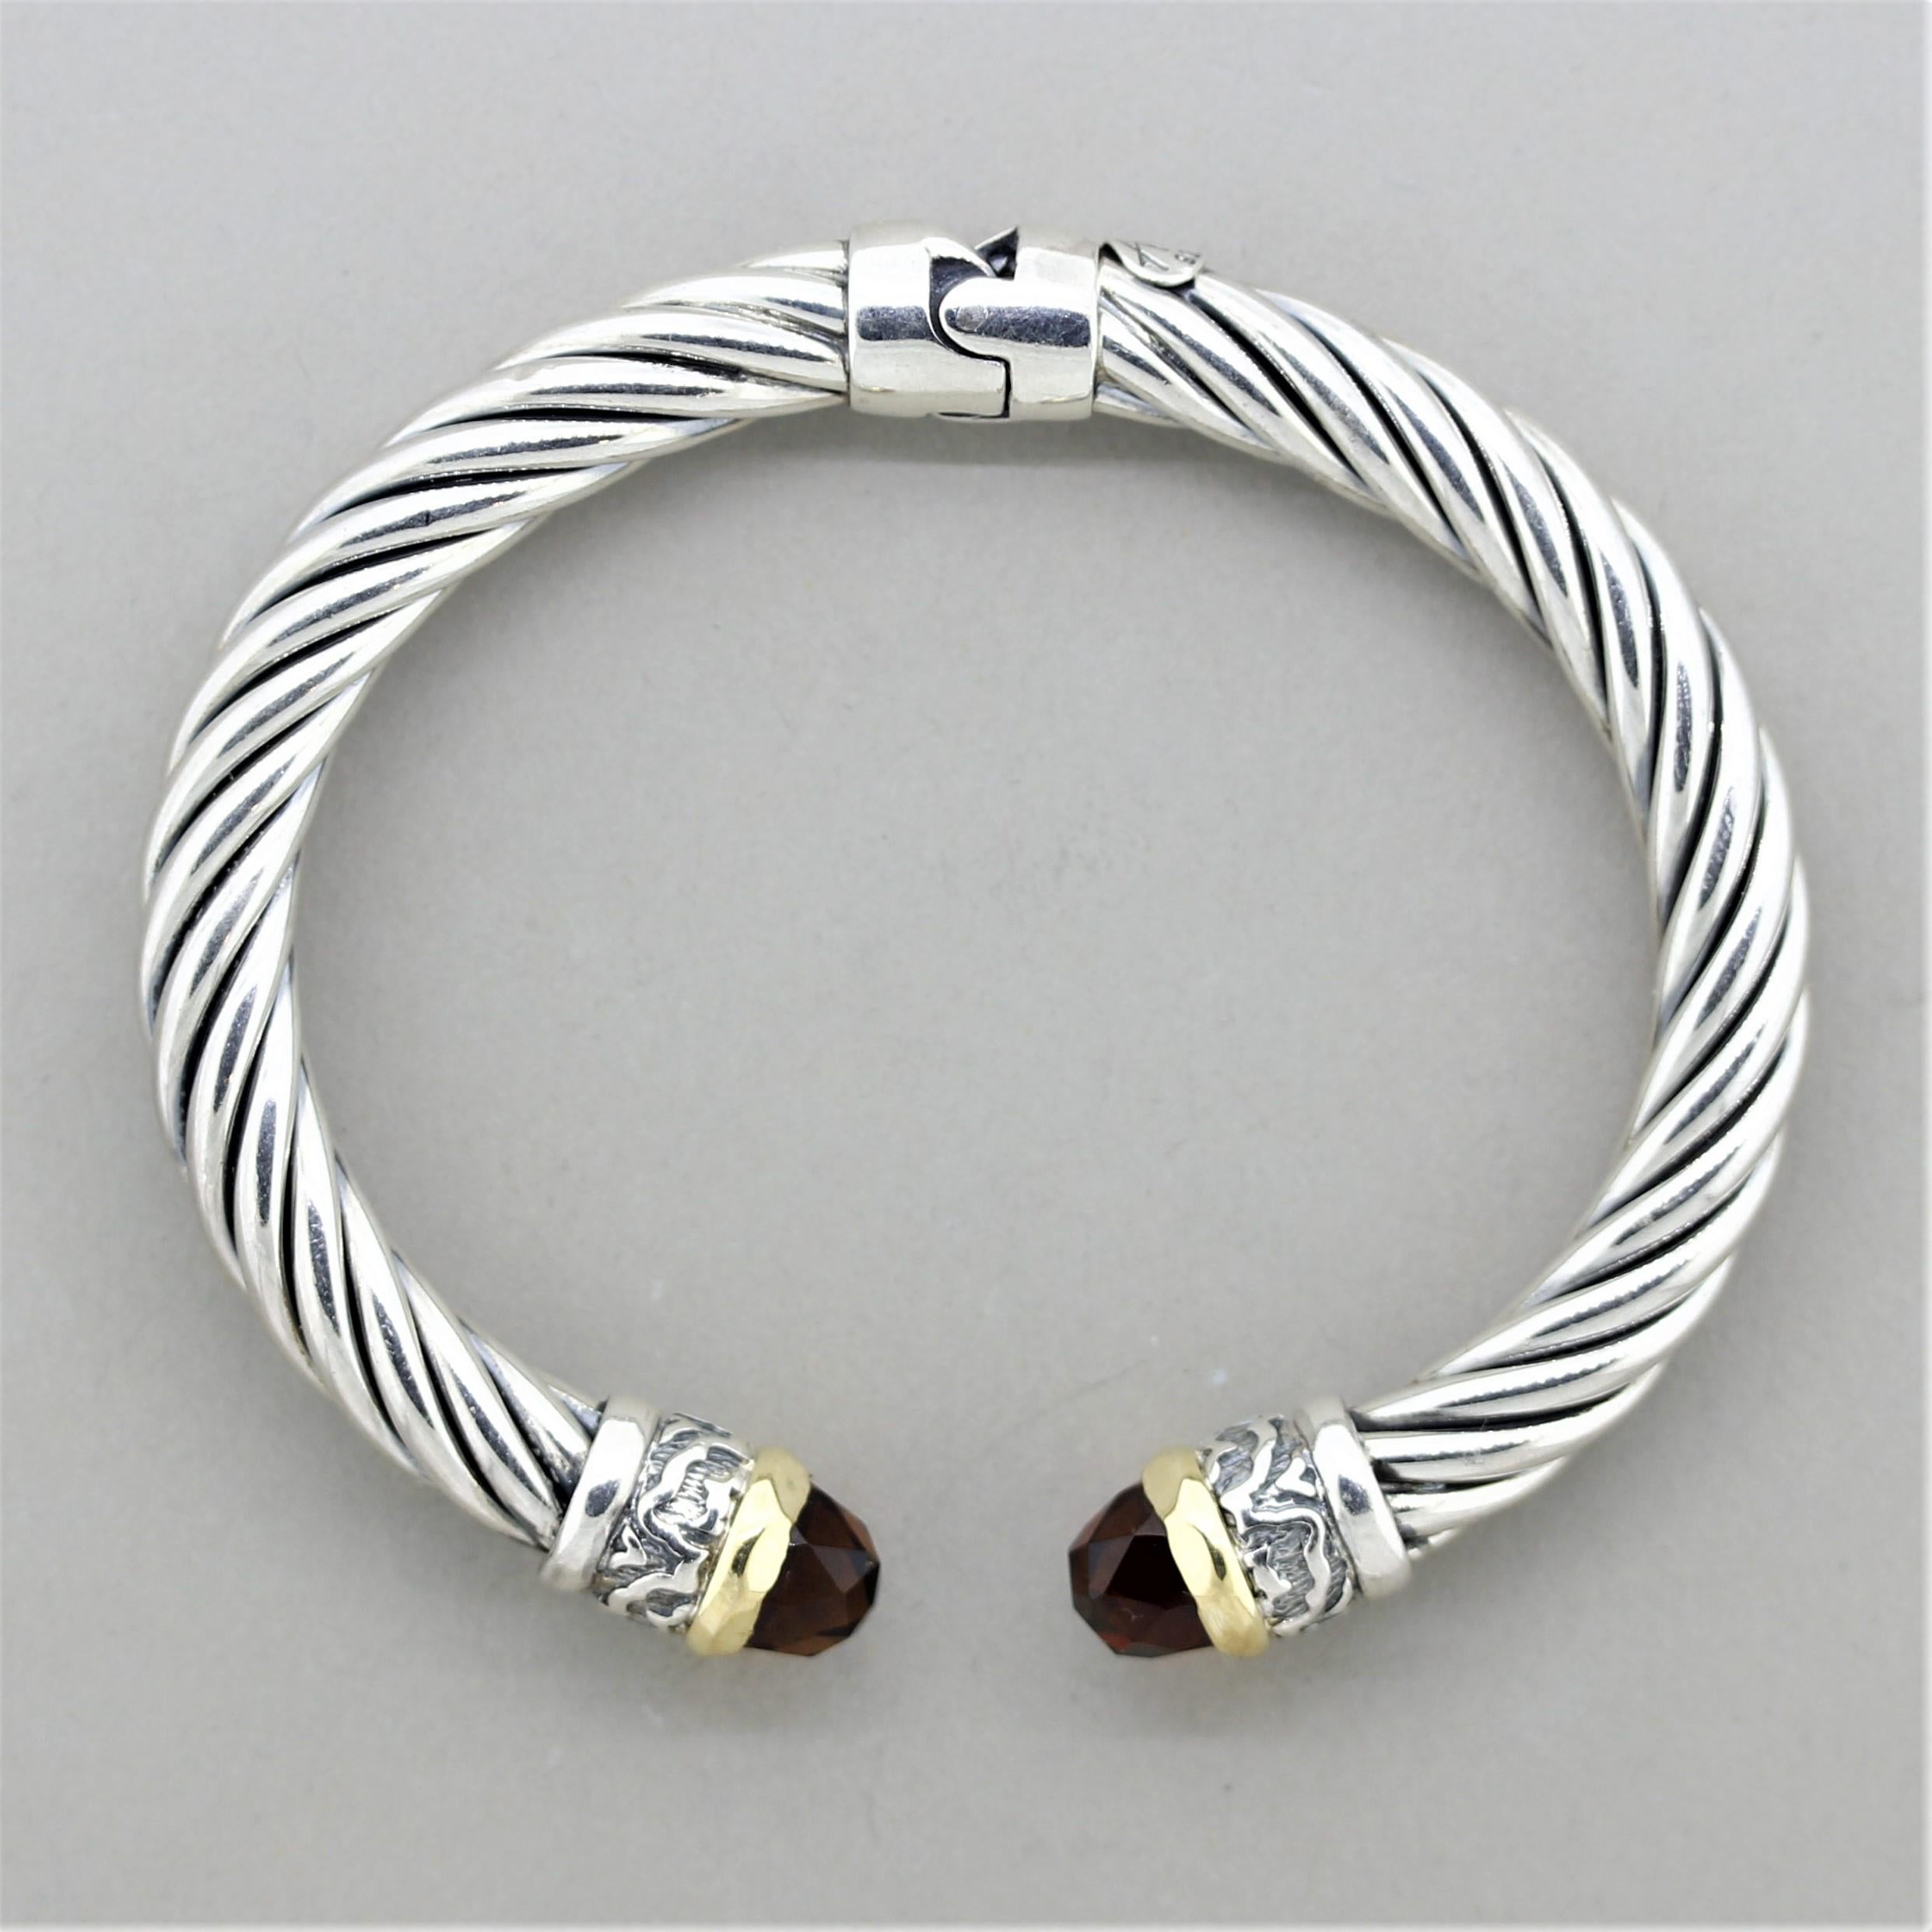 A classic example of Italian design, this bracelet by Alisa is made in both sterling silver and 18k yellow gold. It features 2 rose-cut garnets with a rich reddish-orange color. The twisted cable design is a classic Italian style.

Length: 8 inches